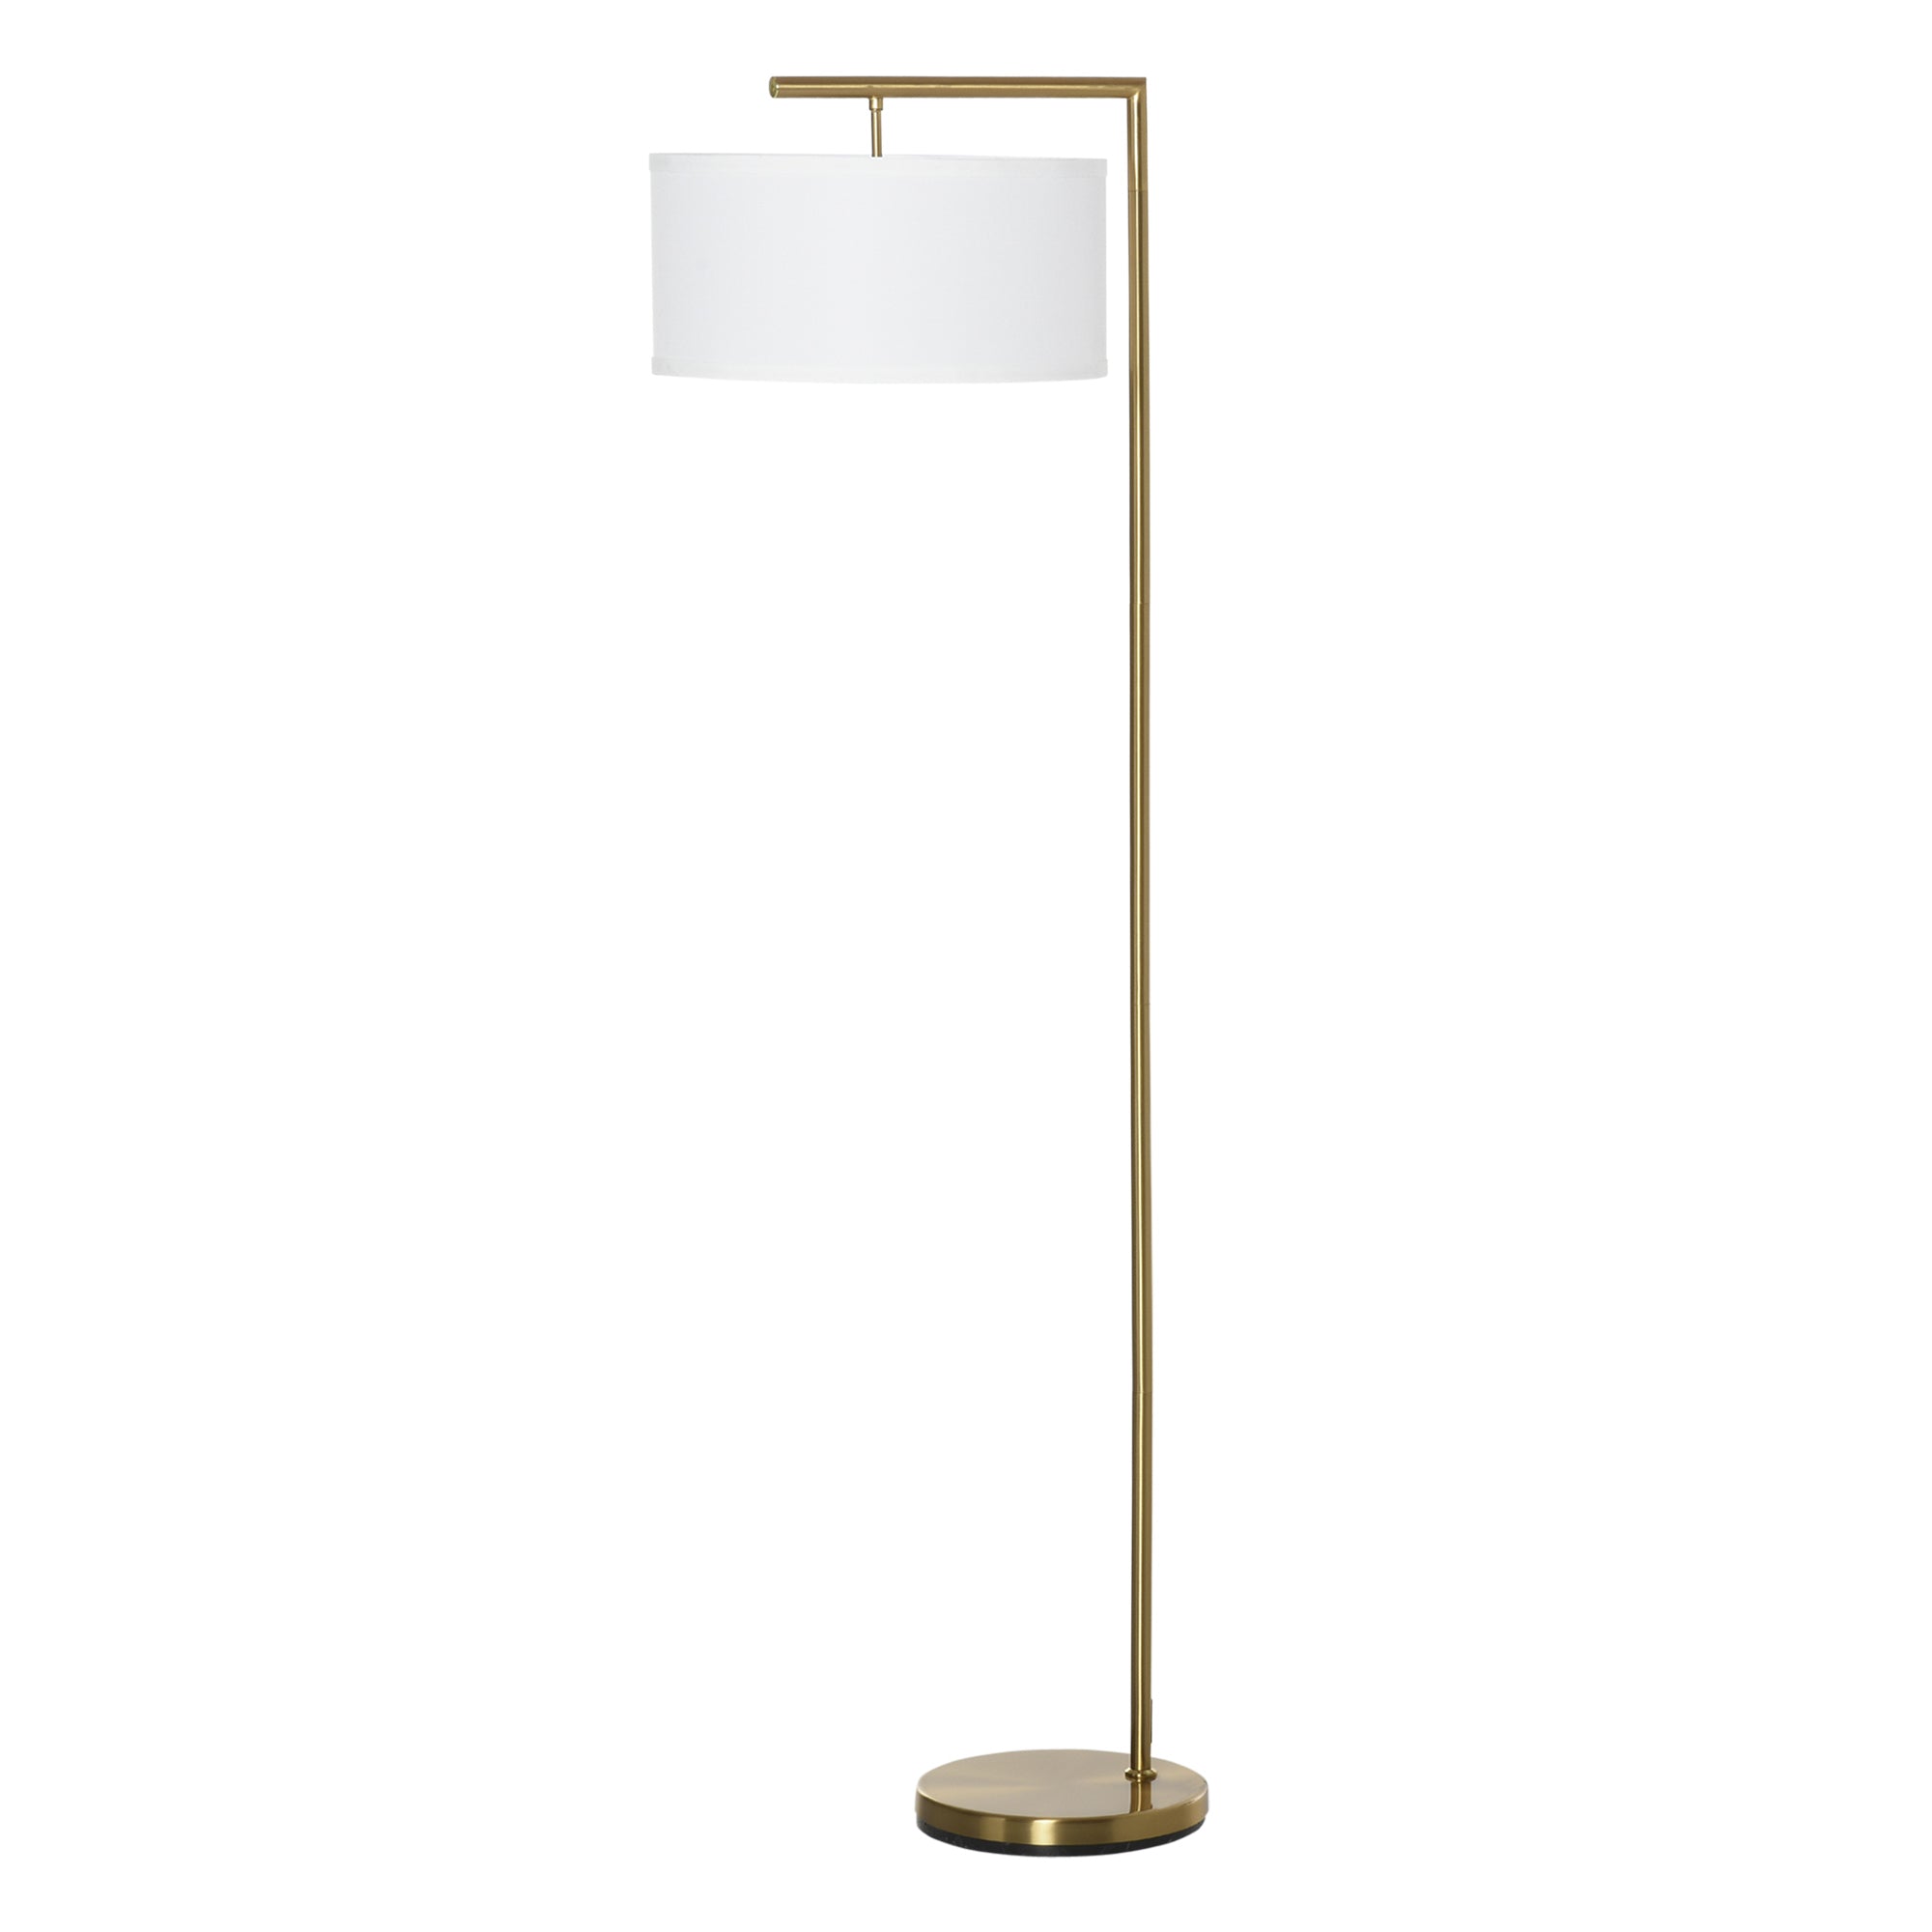 Floor Lamp, Modern Standing Light with Linen Lampshade, Round Base for Living Room, Bedroom, Dining Room, Gold and White  AOSOM   